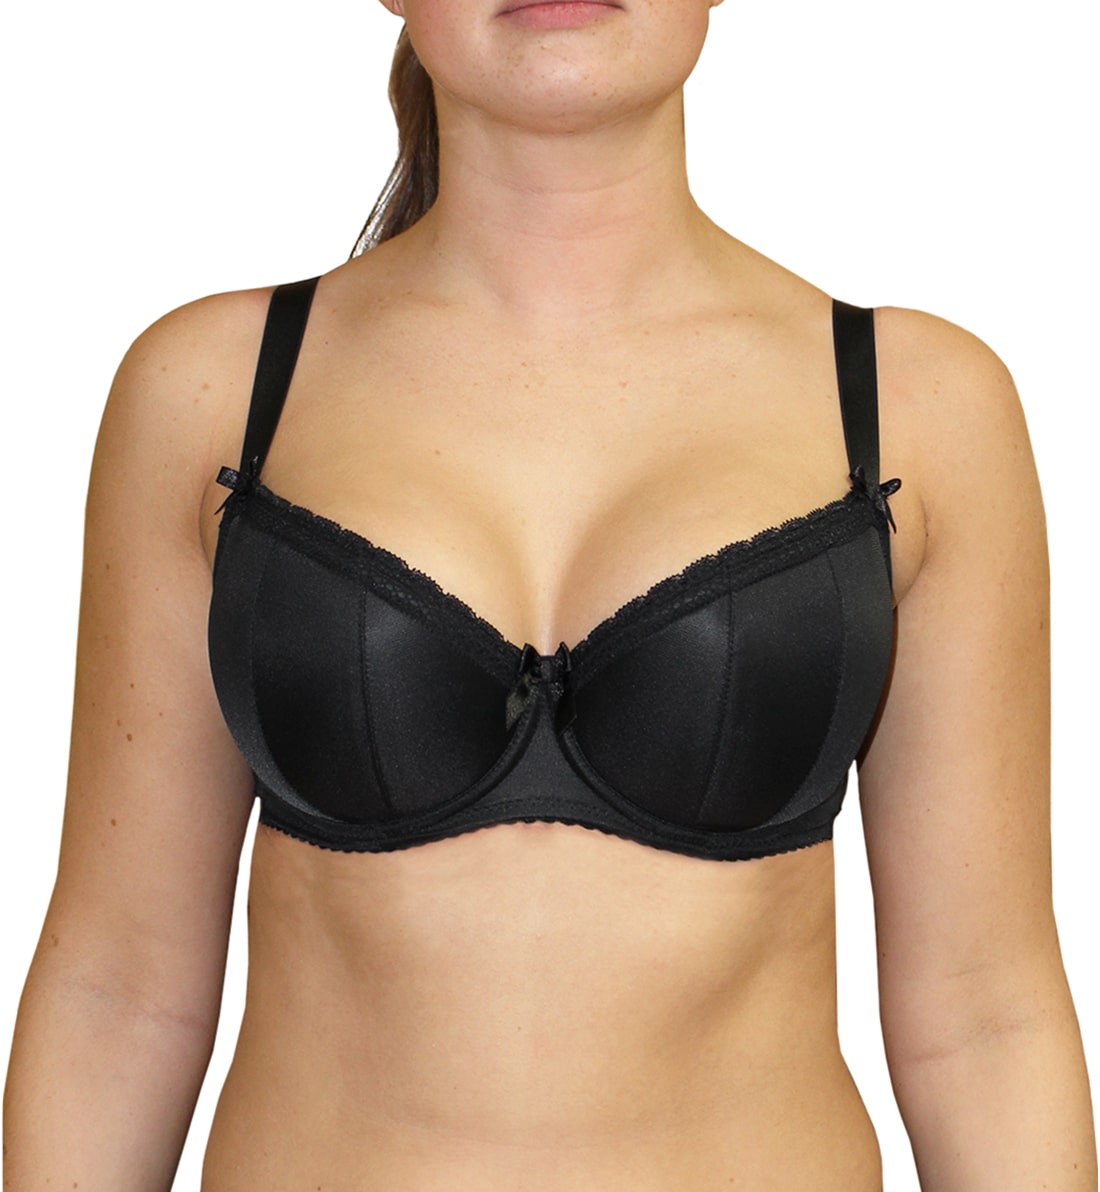 I have a 36F chest - my favorite brand of bras uses no underwire